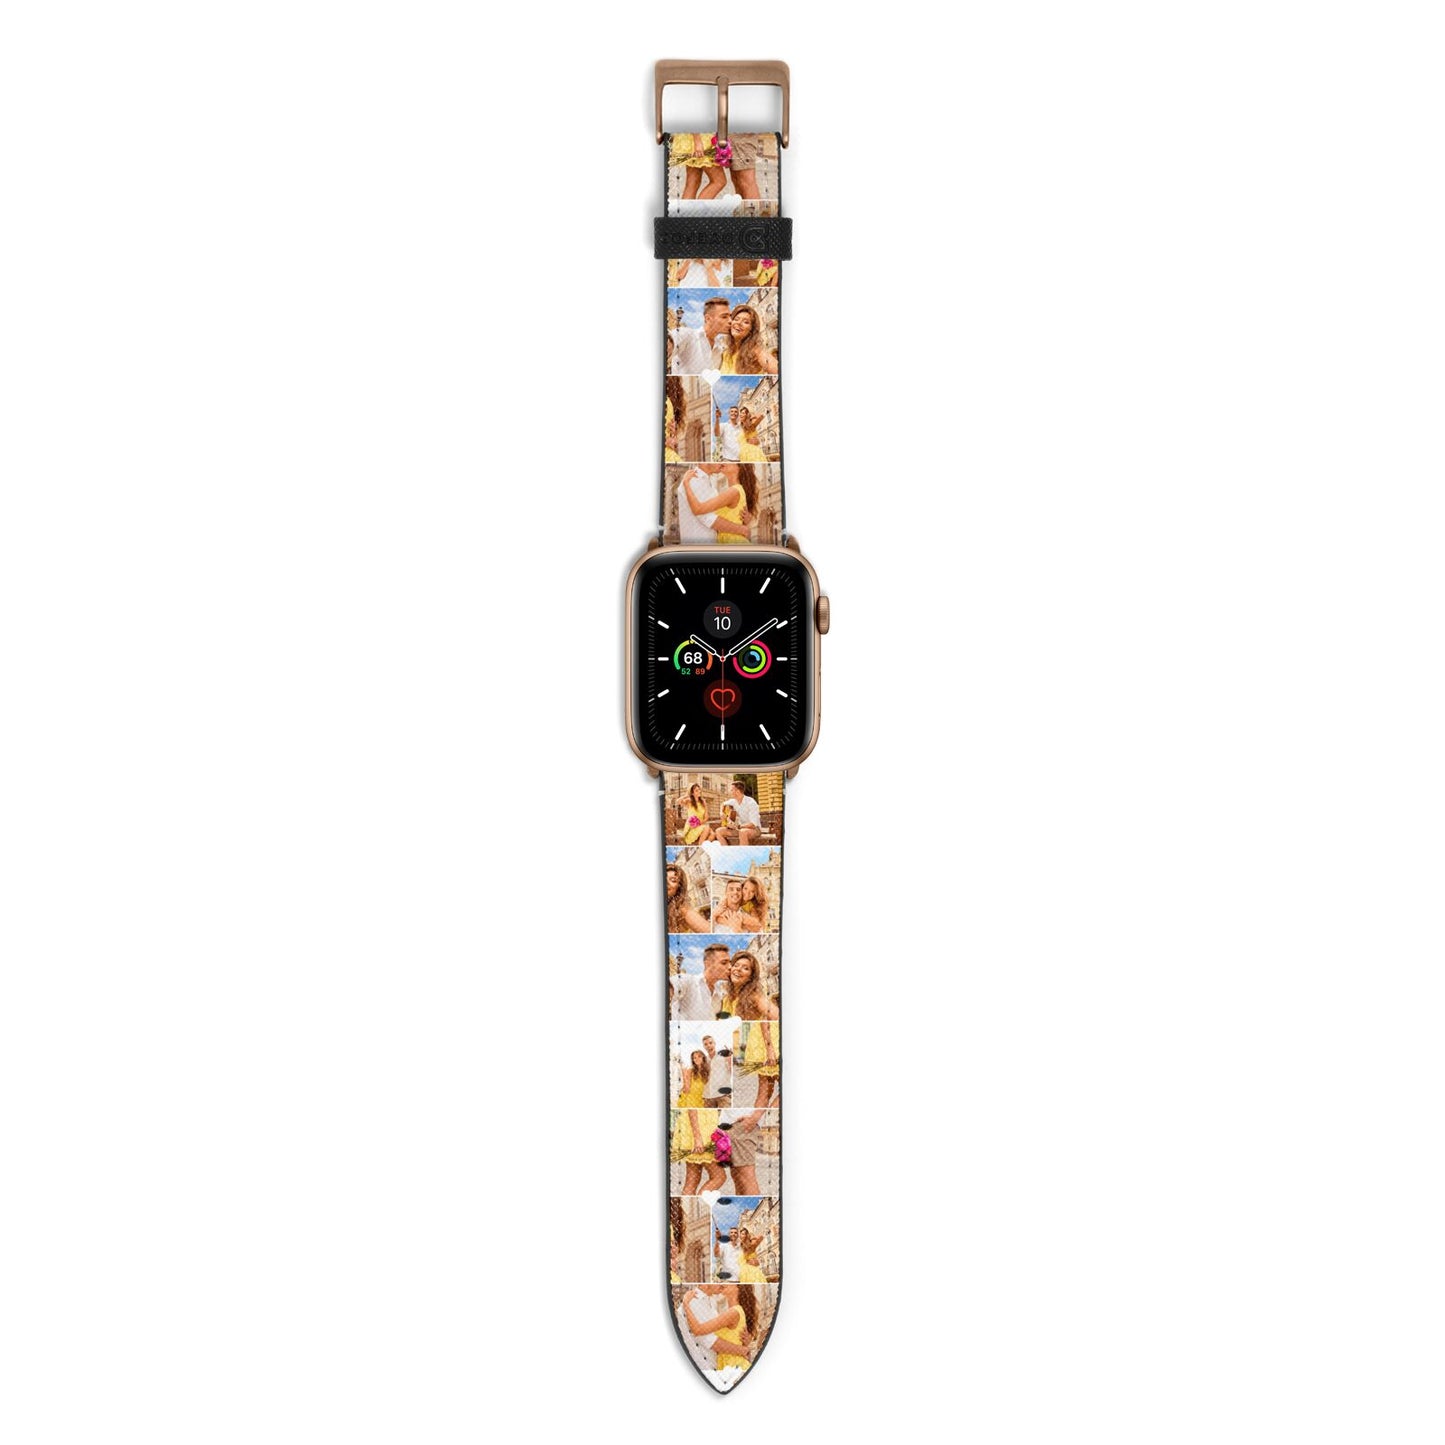 Photo Collage Heart Apple Watch Strap with Gold Hardware